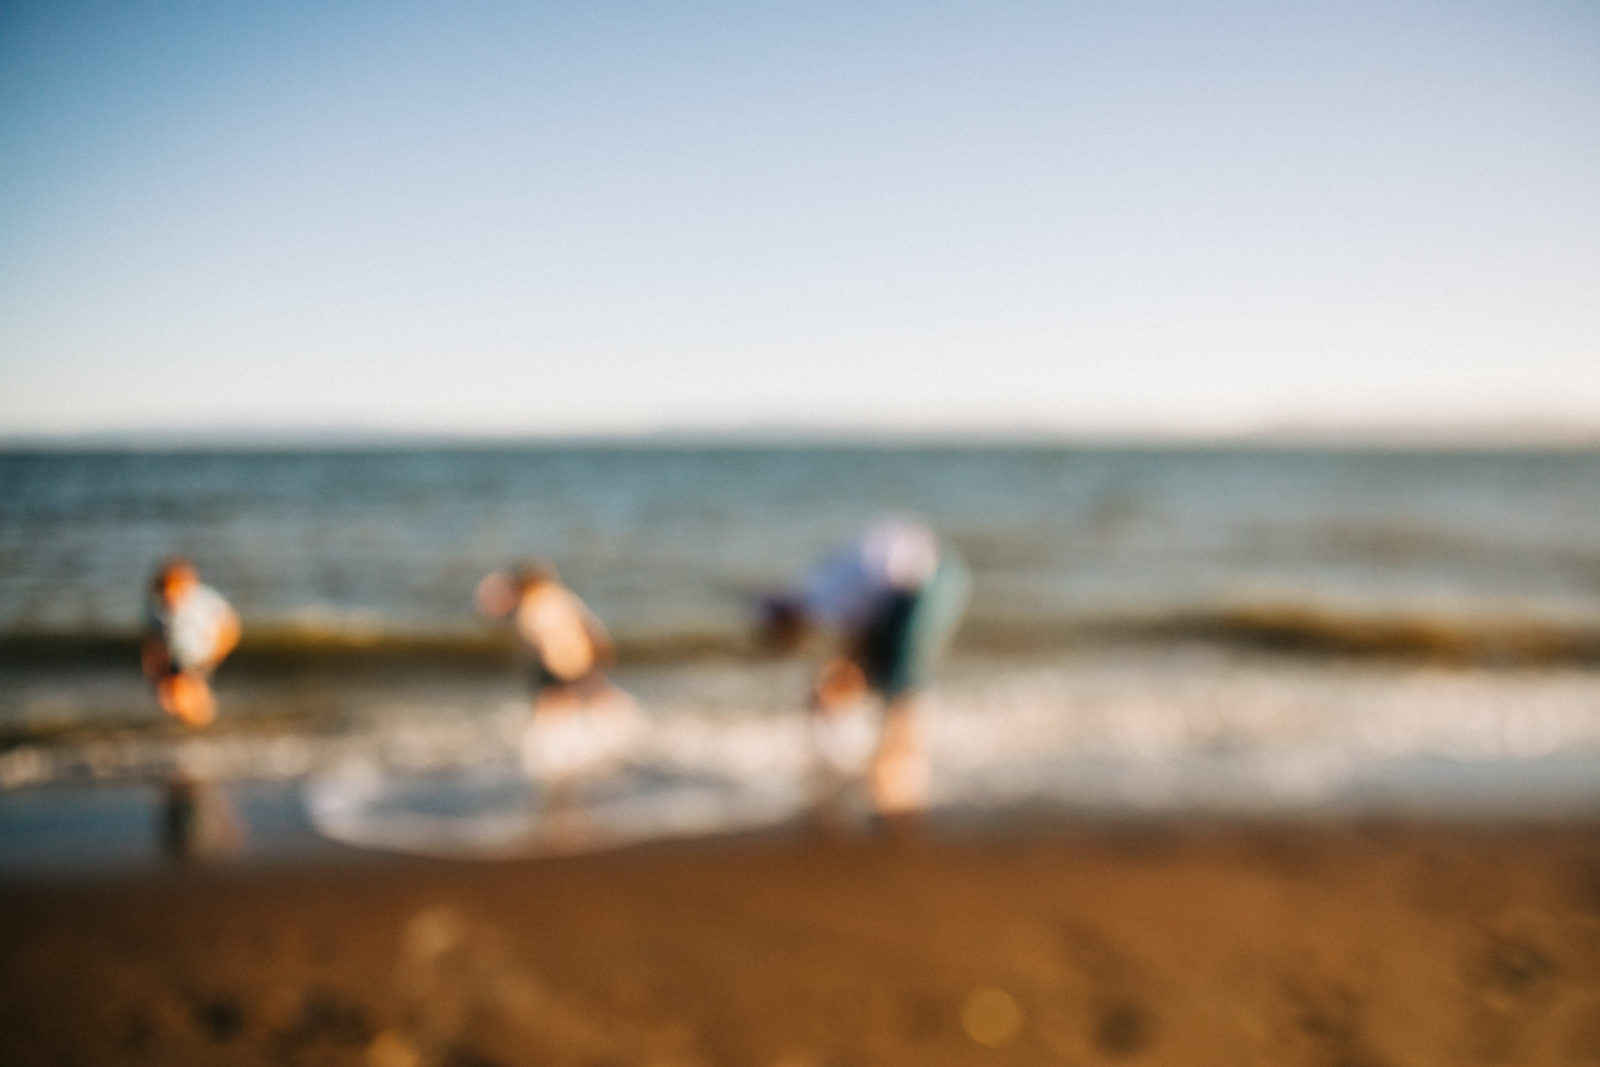 out of focus photo of three people on beach